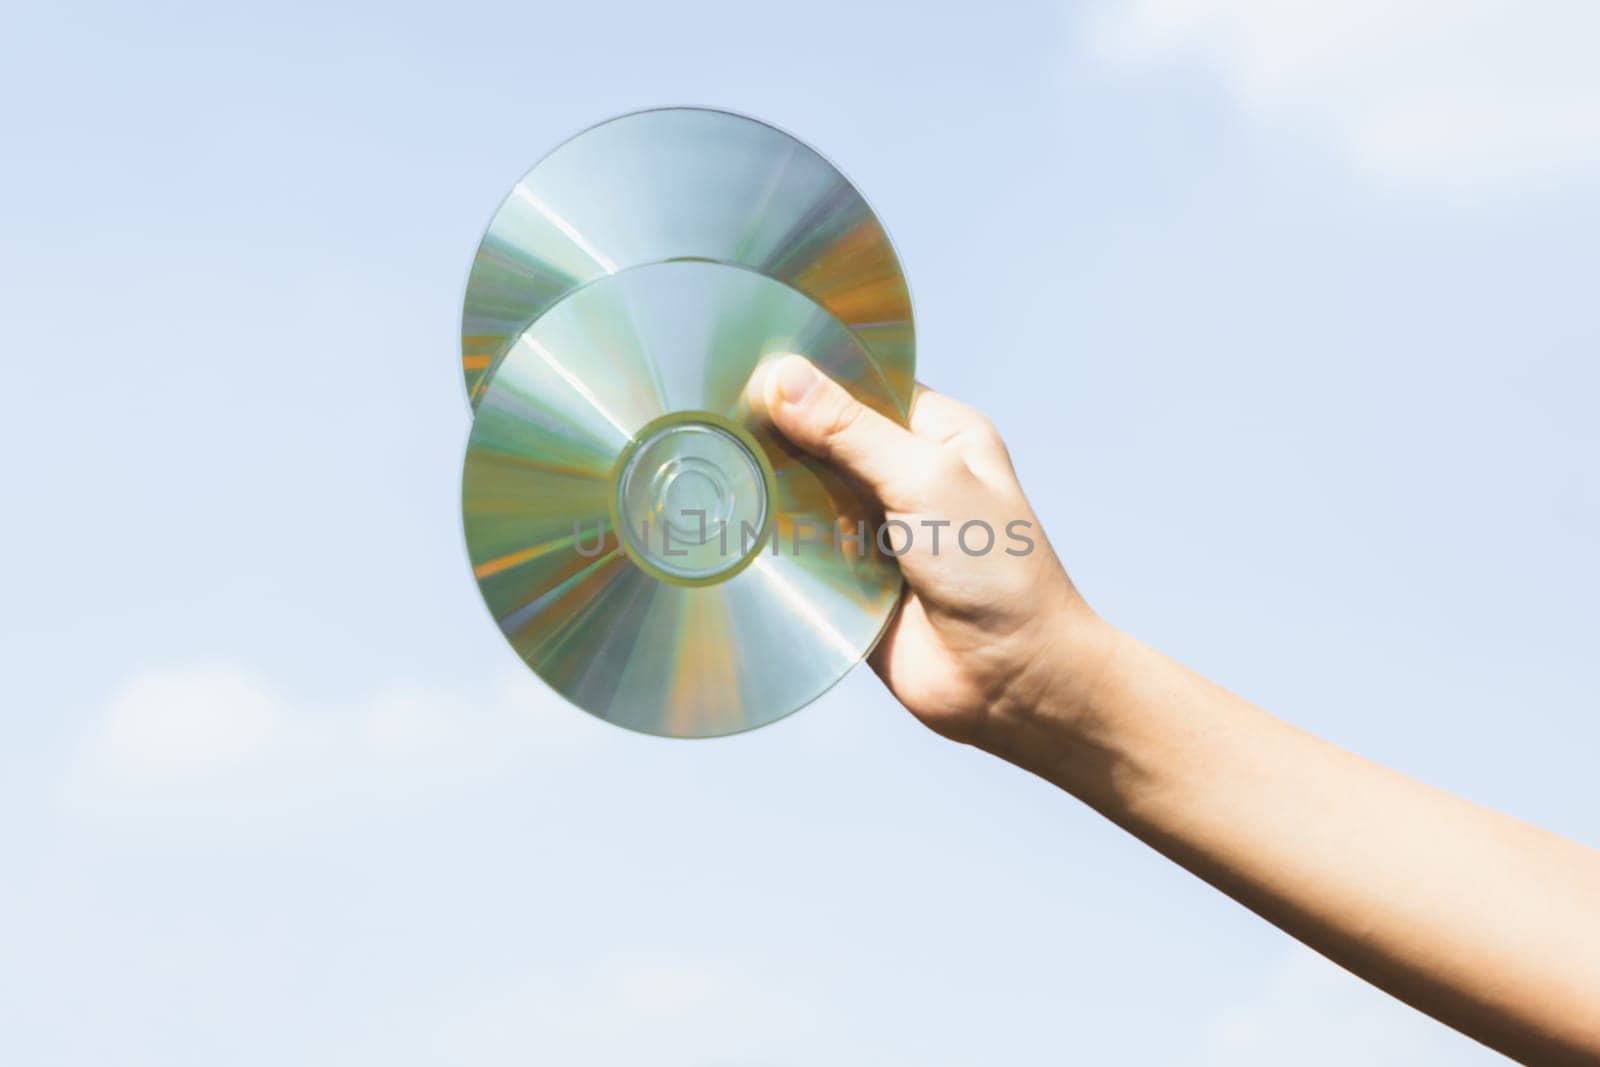 Recyclable CD disk held in hand up on sky-like isolated background. Gyre by biancoblue